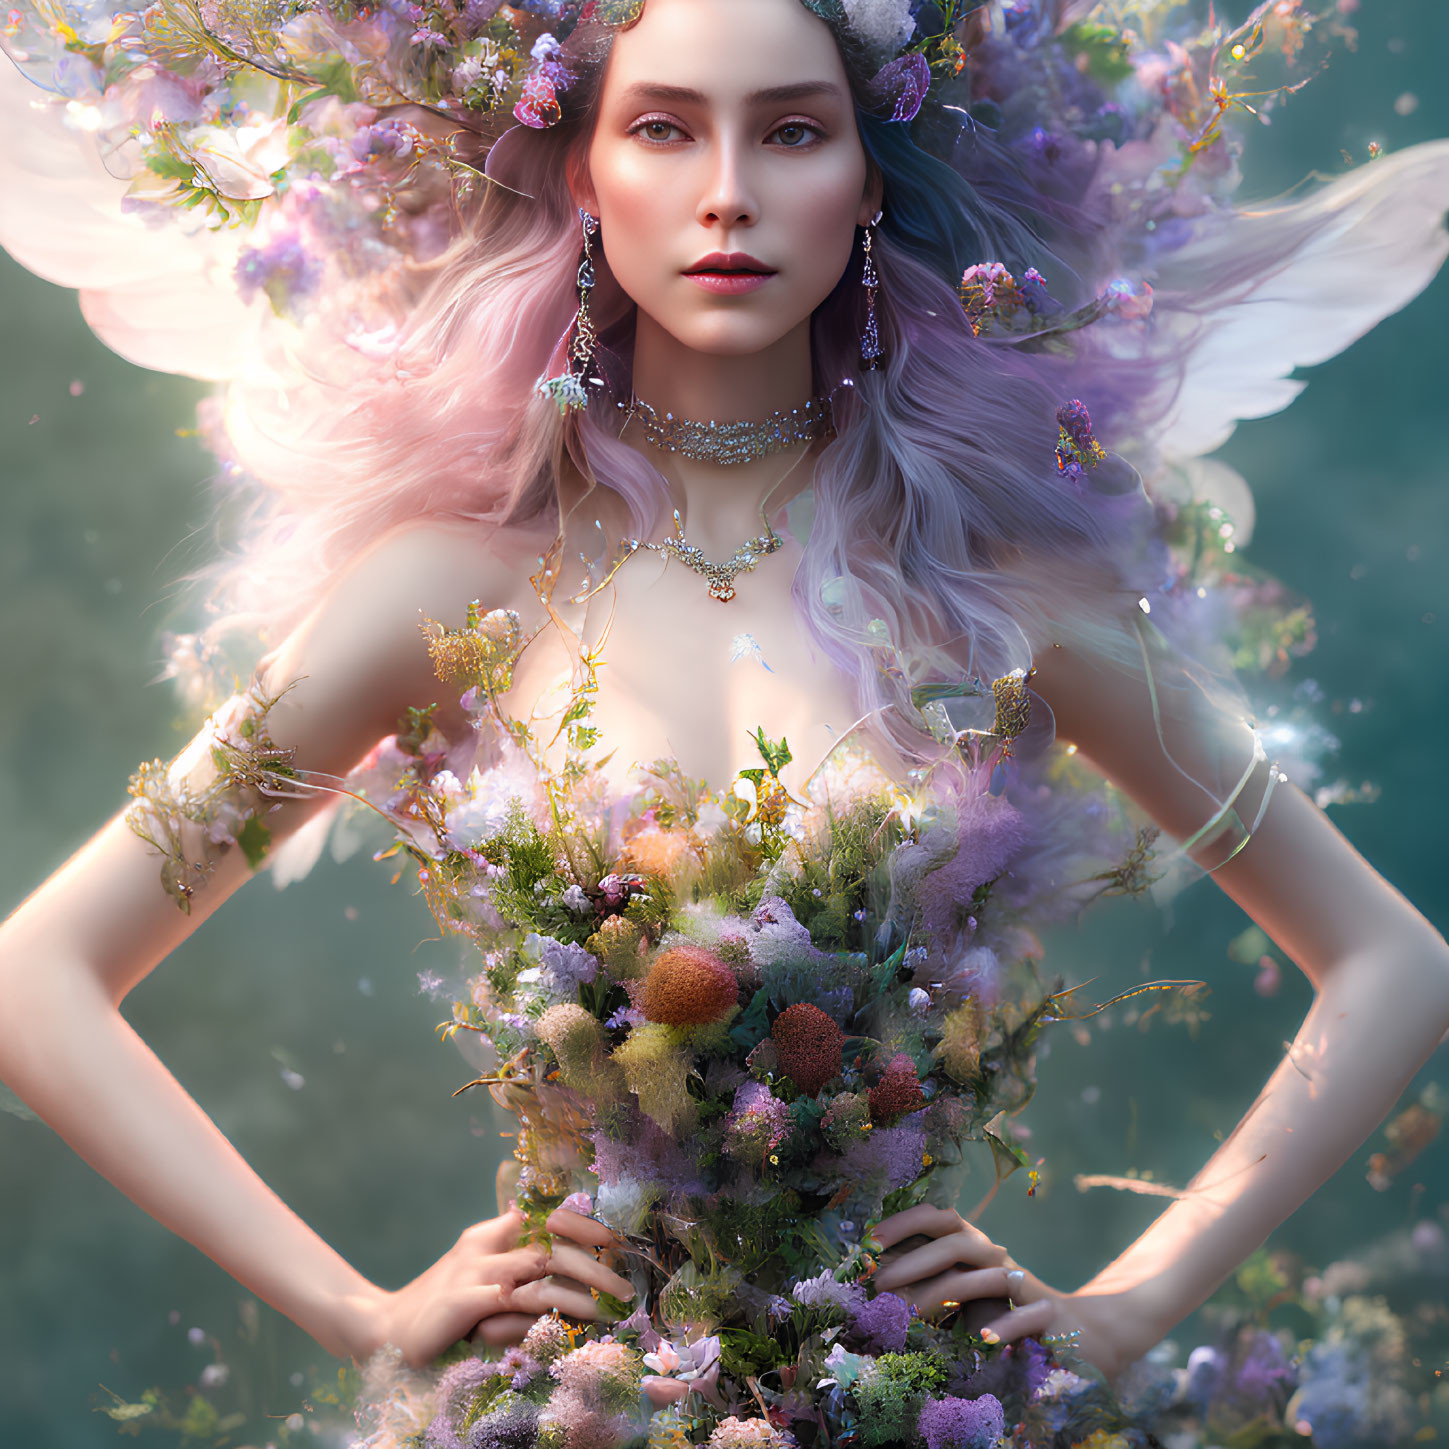 Woman with ethereal wings and floral attire in fantastical art